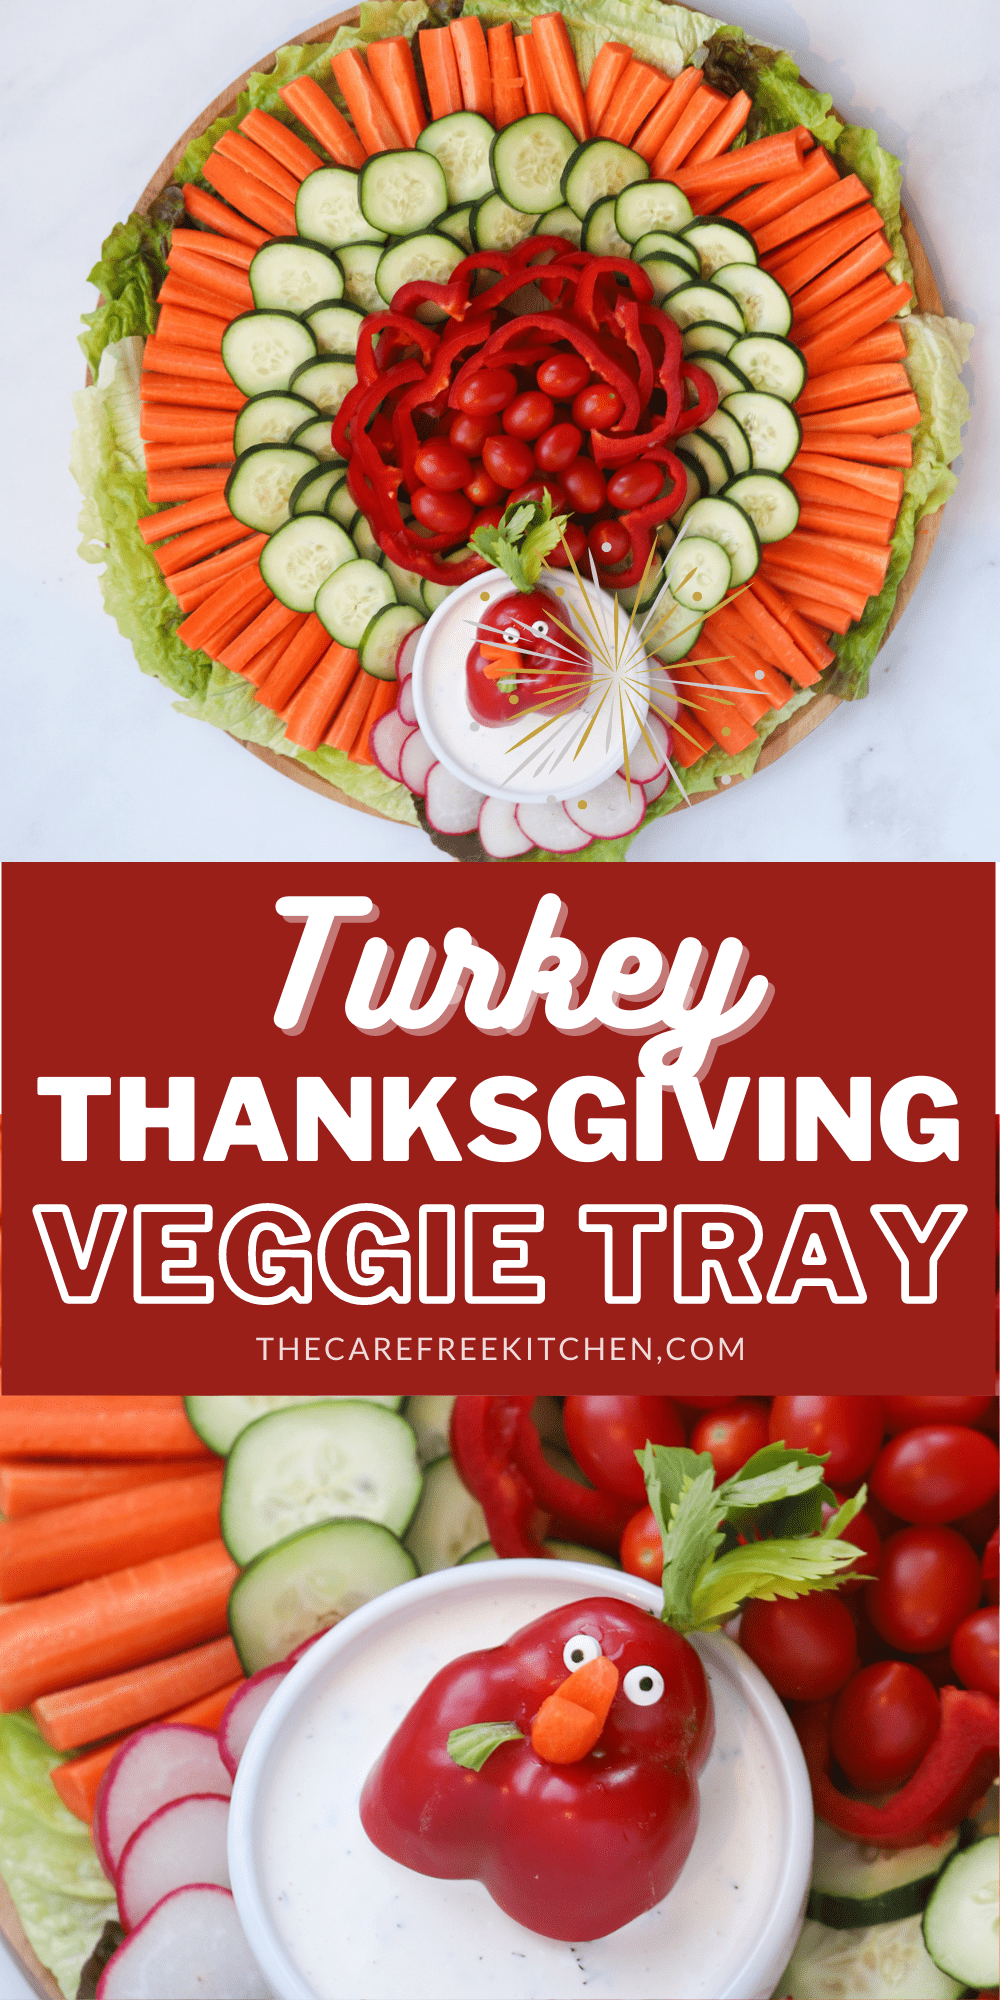 Holiday Veggie Tray - The Carefree Kitchen